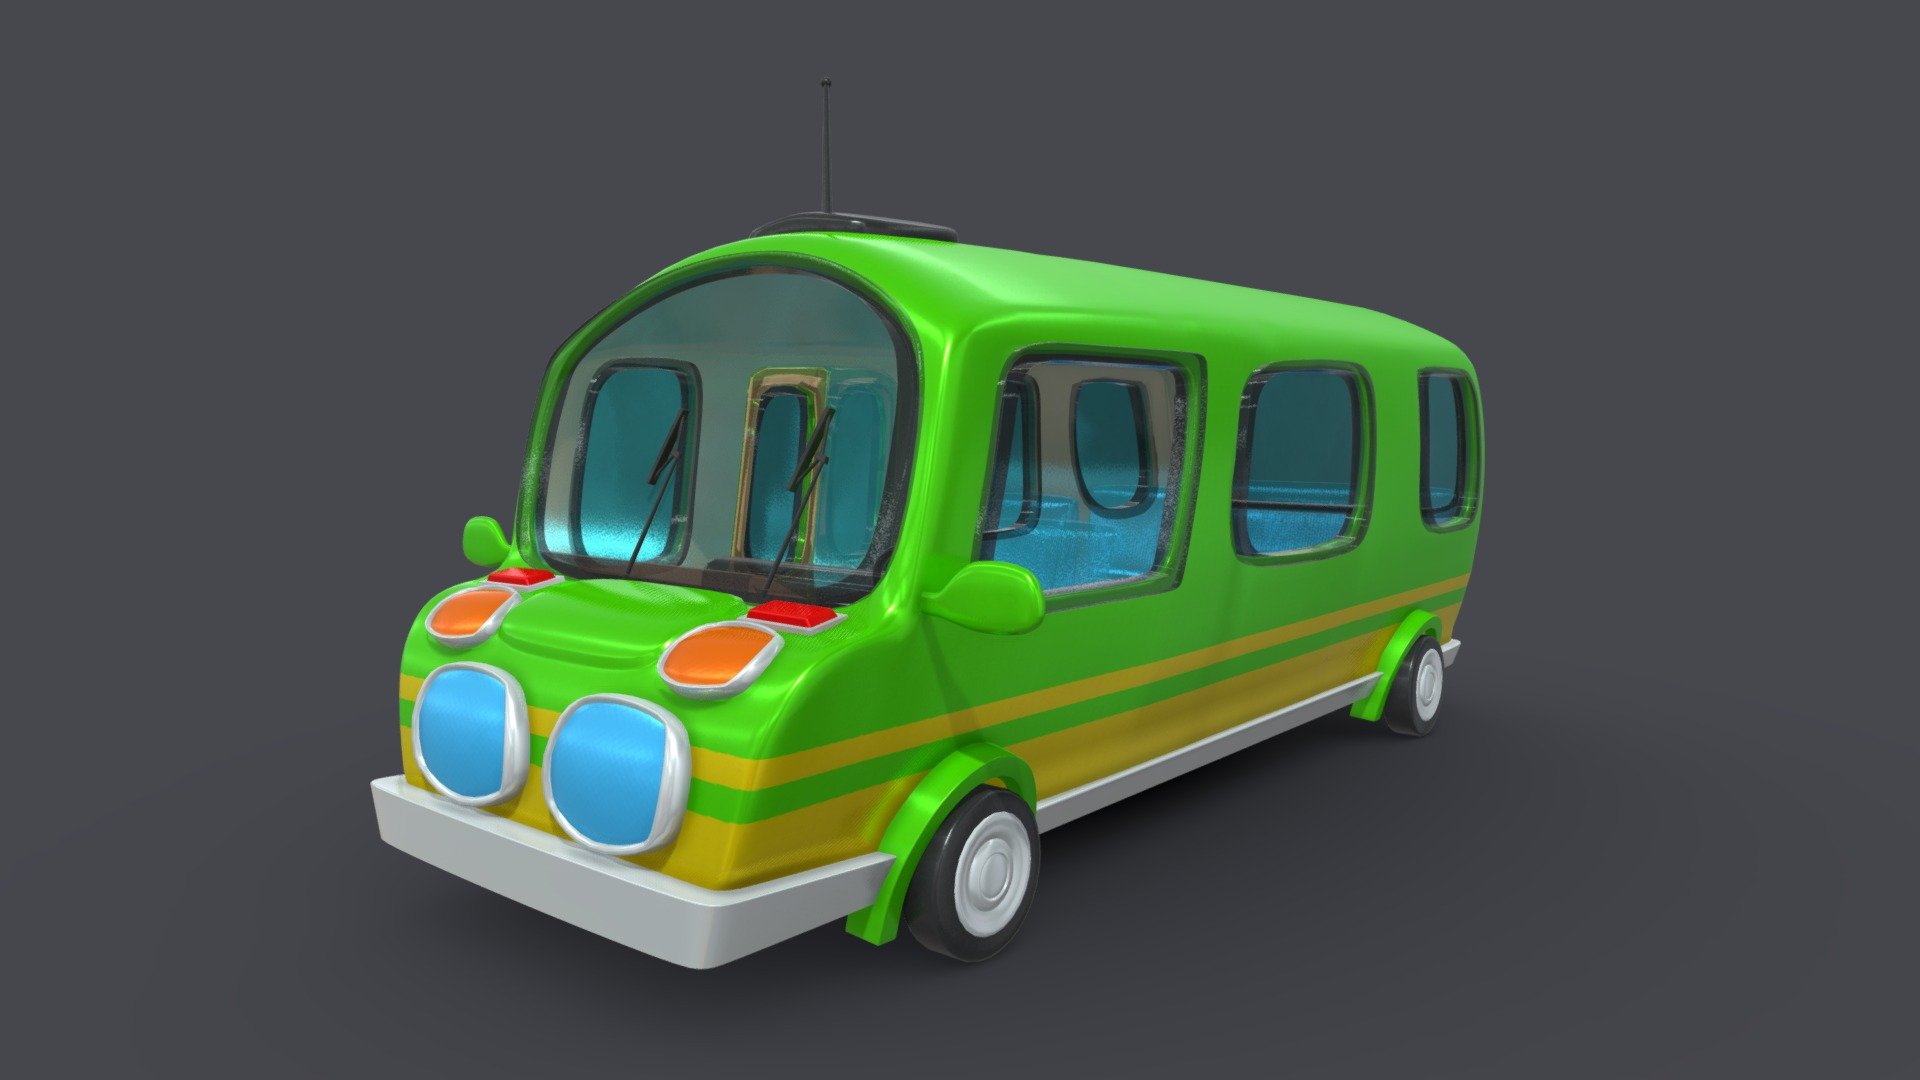 3D Models Bus

Polys : 44841 Verts: 46598

Textures: 02 textures diff 2048 x 2048 pixel

Model we designed to be suitable for cartoons.

Hope you like this

Thanks for watching - Asset - Cartoons - Bus - 02 - 3D Model - Buy Royalty Free 3D model by InCom Studio (@incomstudio) 3d model